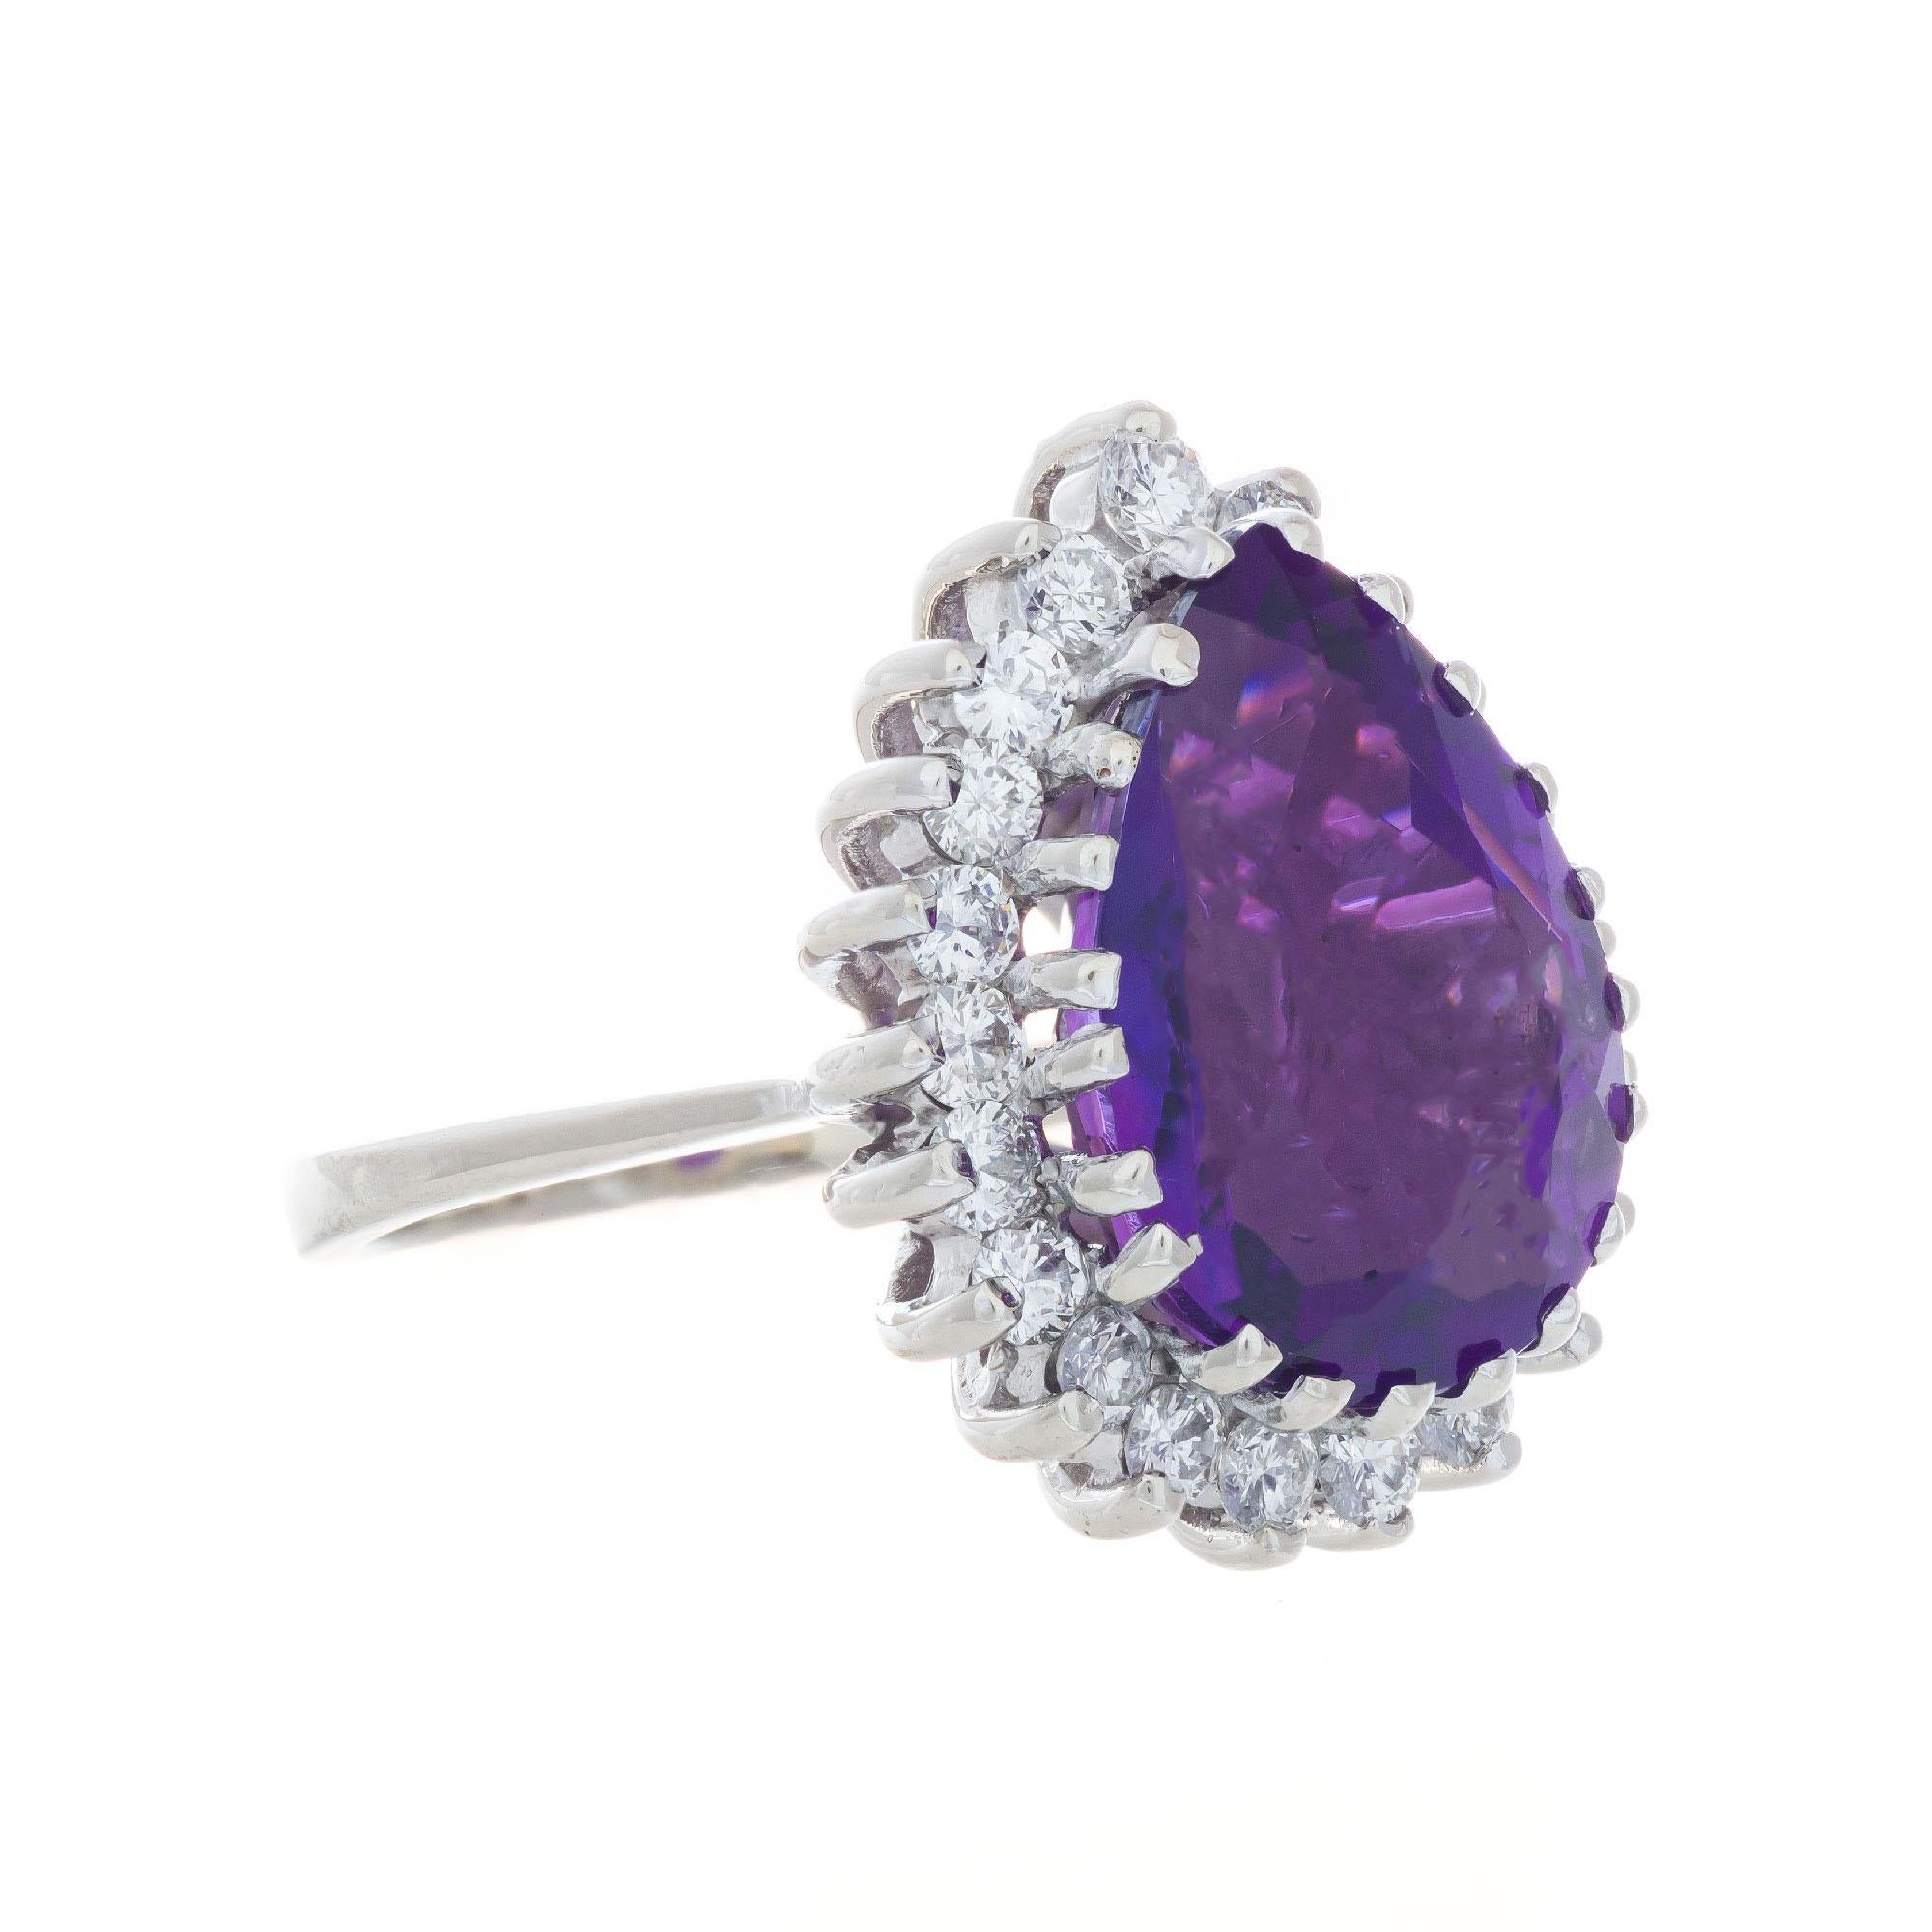 1950's pear shaped amethyst with a halo of 21 round brilliant cut diamonds in a custom wire 14k white gold setting.  

1 pear shaped bright purple Amethyst, approx. total weight 5.00cts, VS, 15 x 11mm
21 round brilliant cut diamonds, approx. total